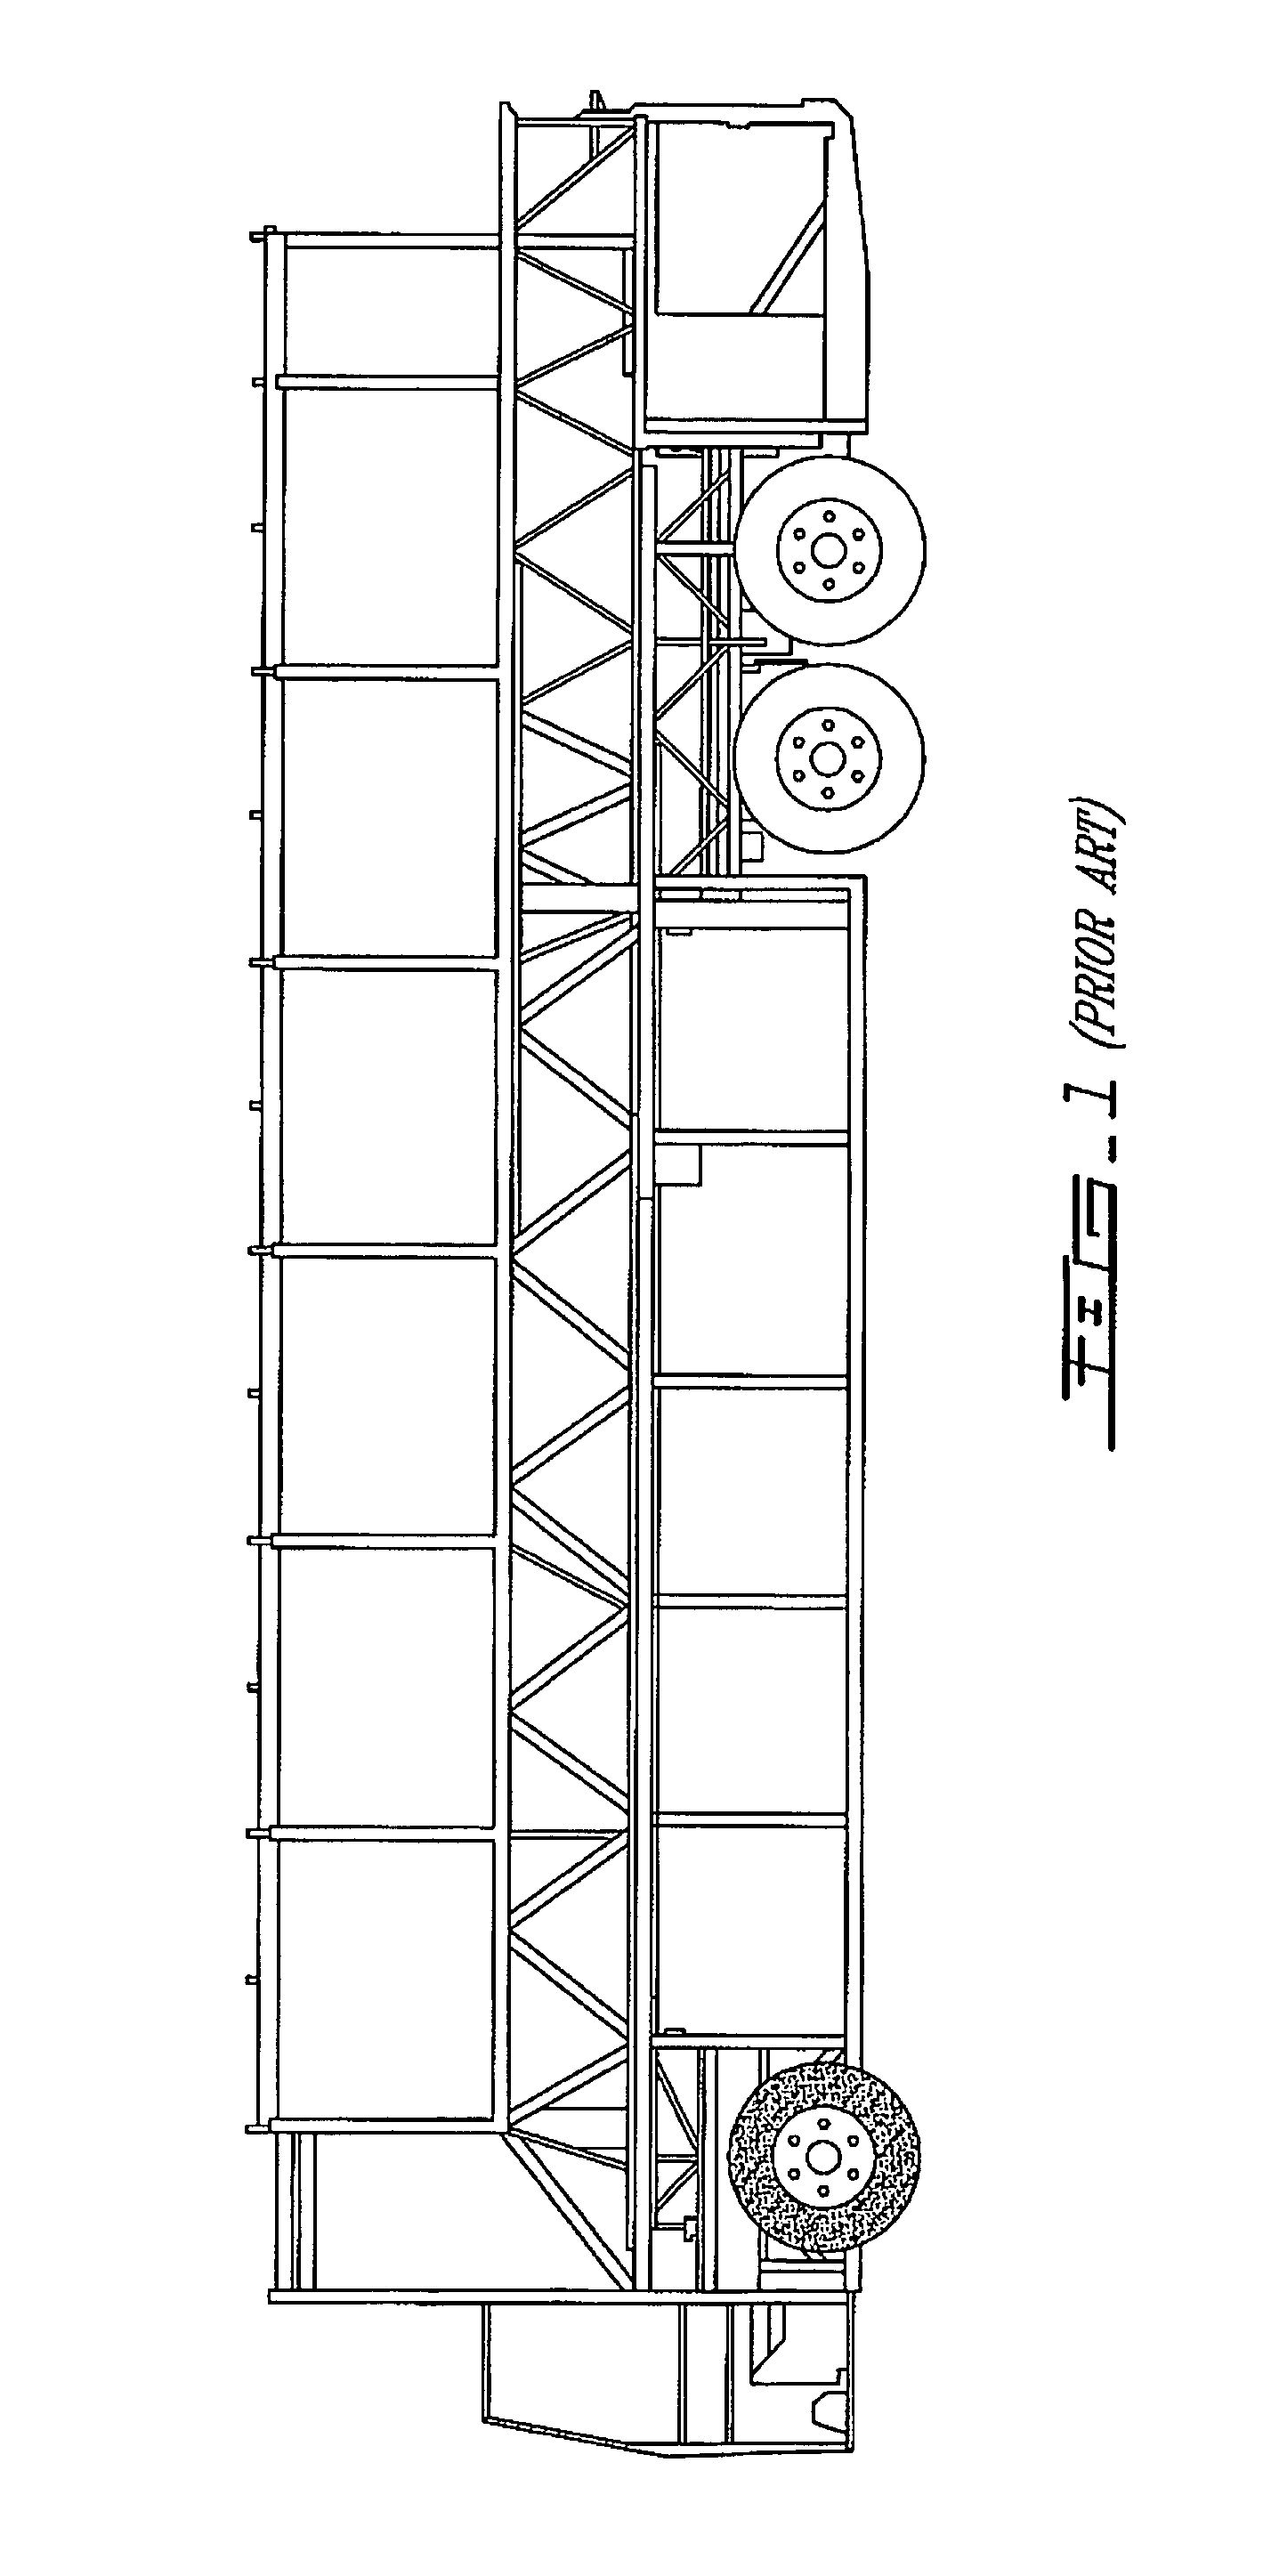 Truss for a vehicle chassis